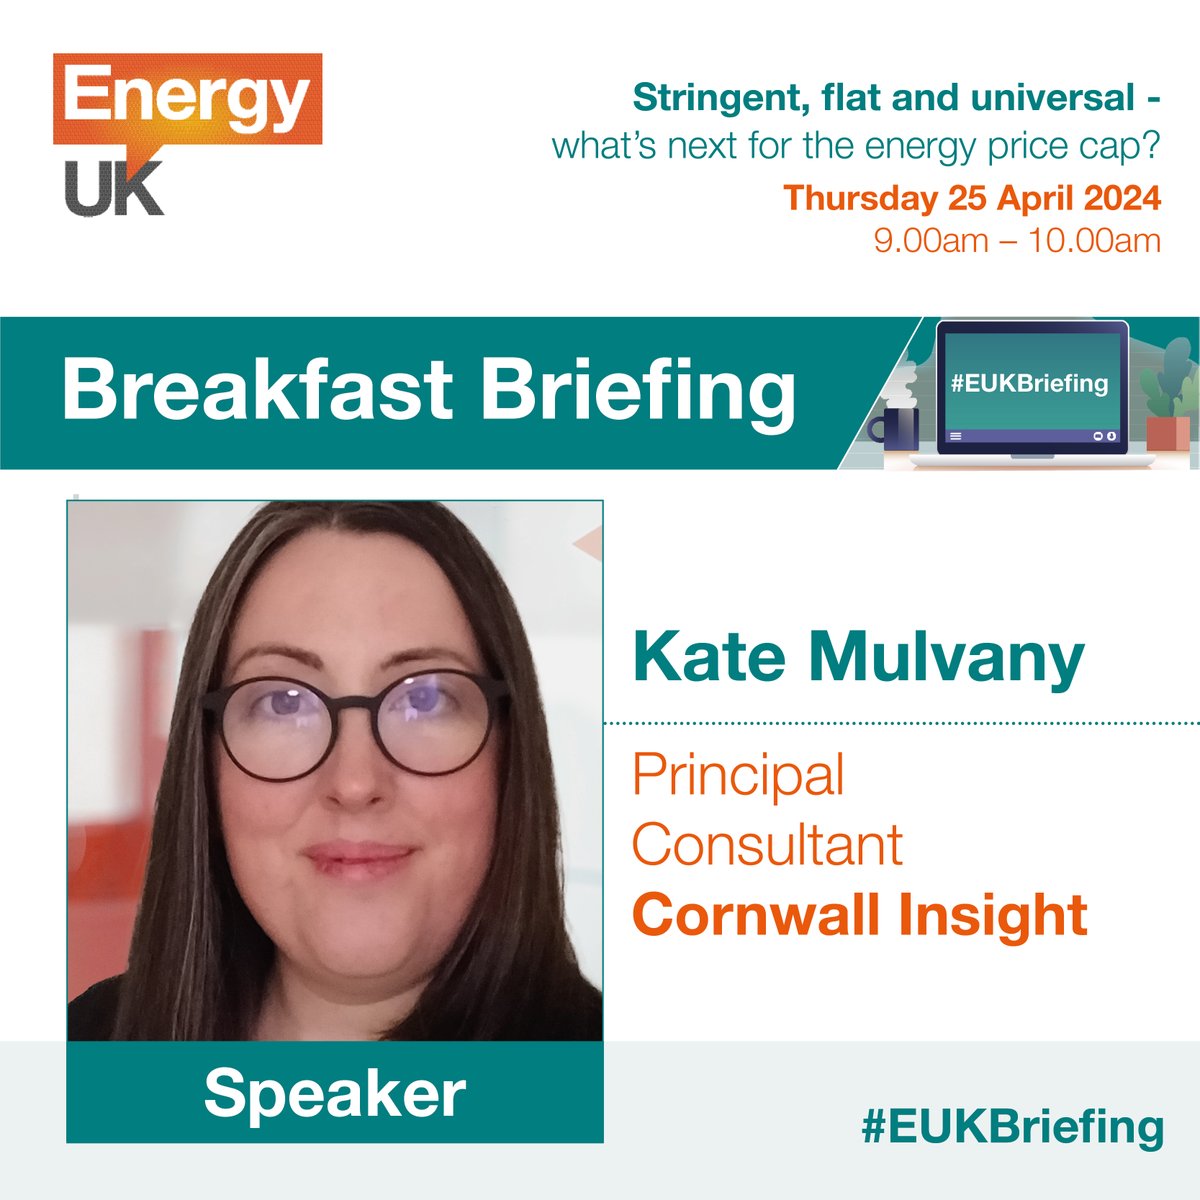 📢 Join us on 25 April 9am -10am for a discussion about the future of #energy price protection. @KateMulvany from @CornwallInsight joins our #EUKbriefing panel to explore objectives, options, and opportunities in reforming price protection. Register here 🚀energy-uk.org.uk/event/stringen…